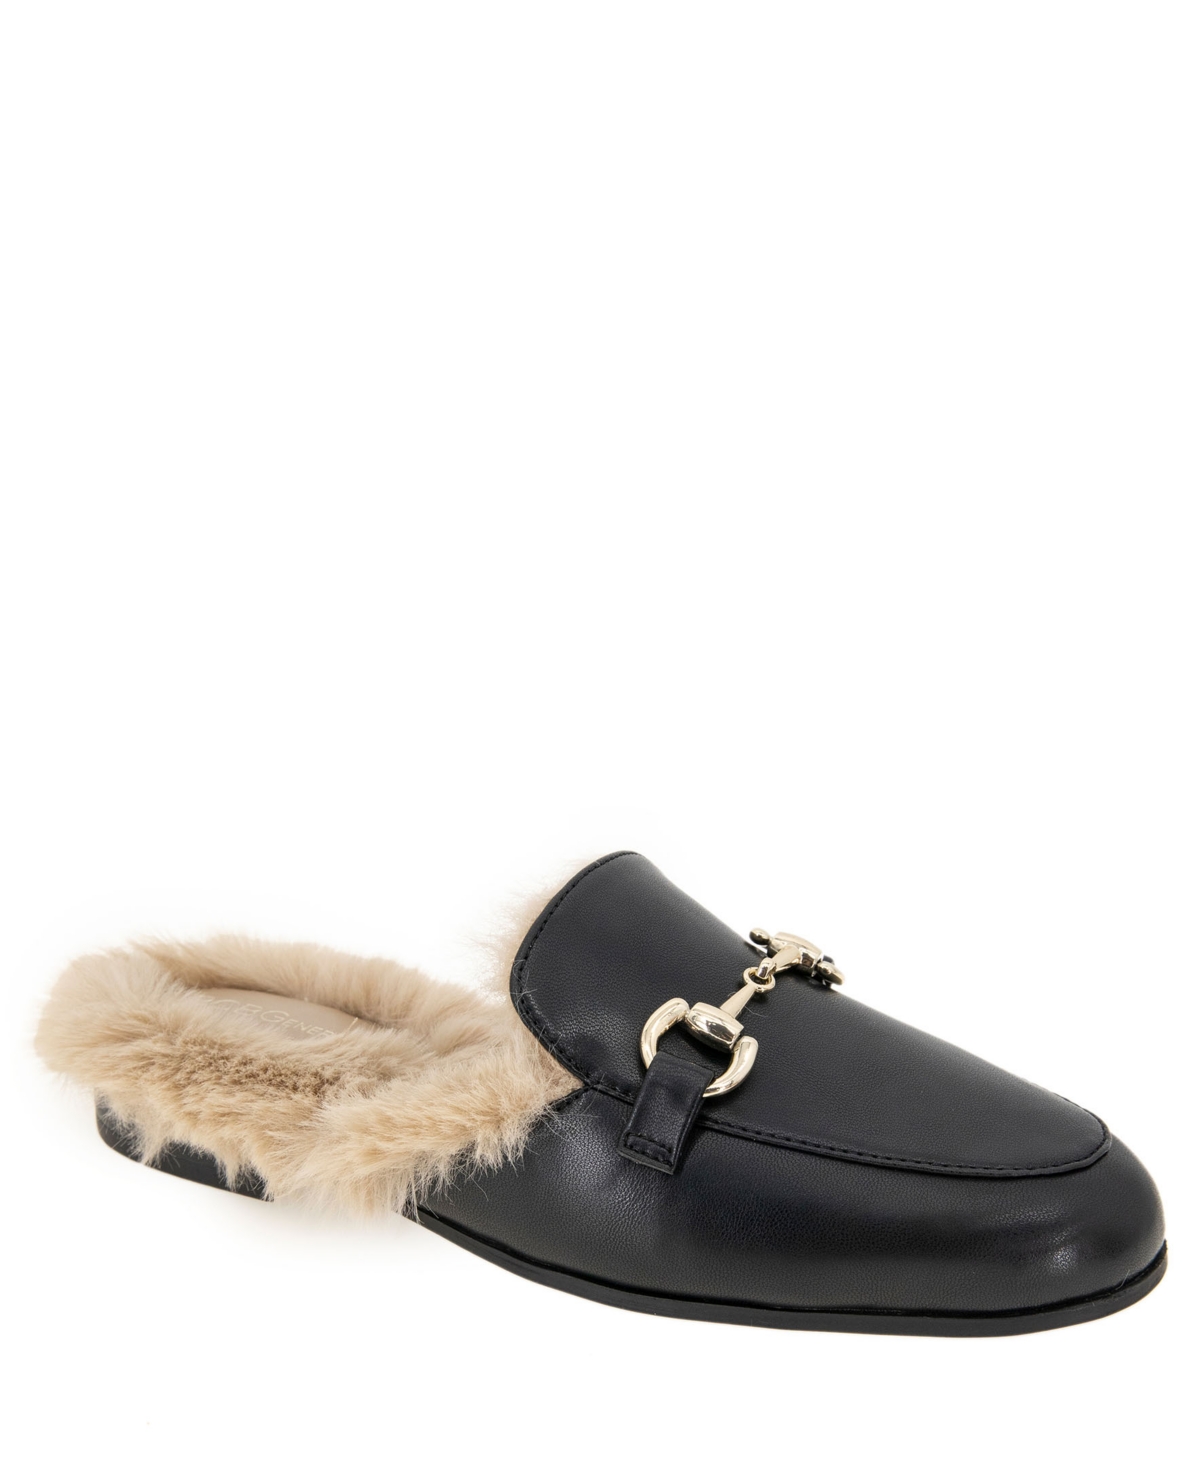 Women's Zorie Tailored Faux-Fur Slip-On Loafer Mules - Black